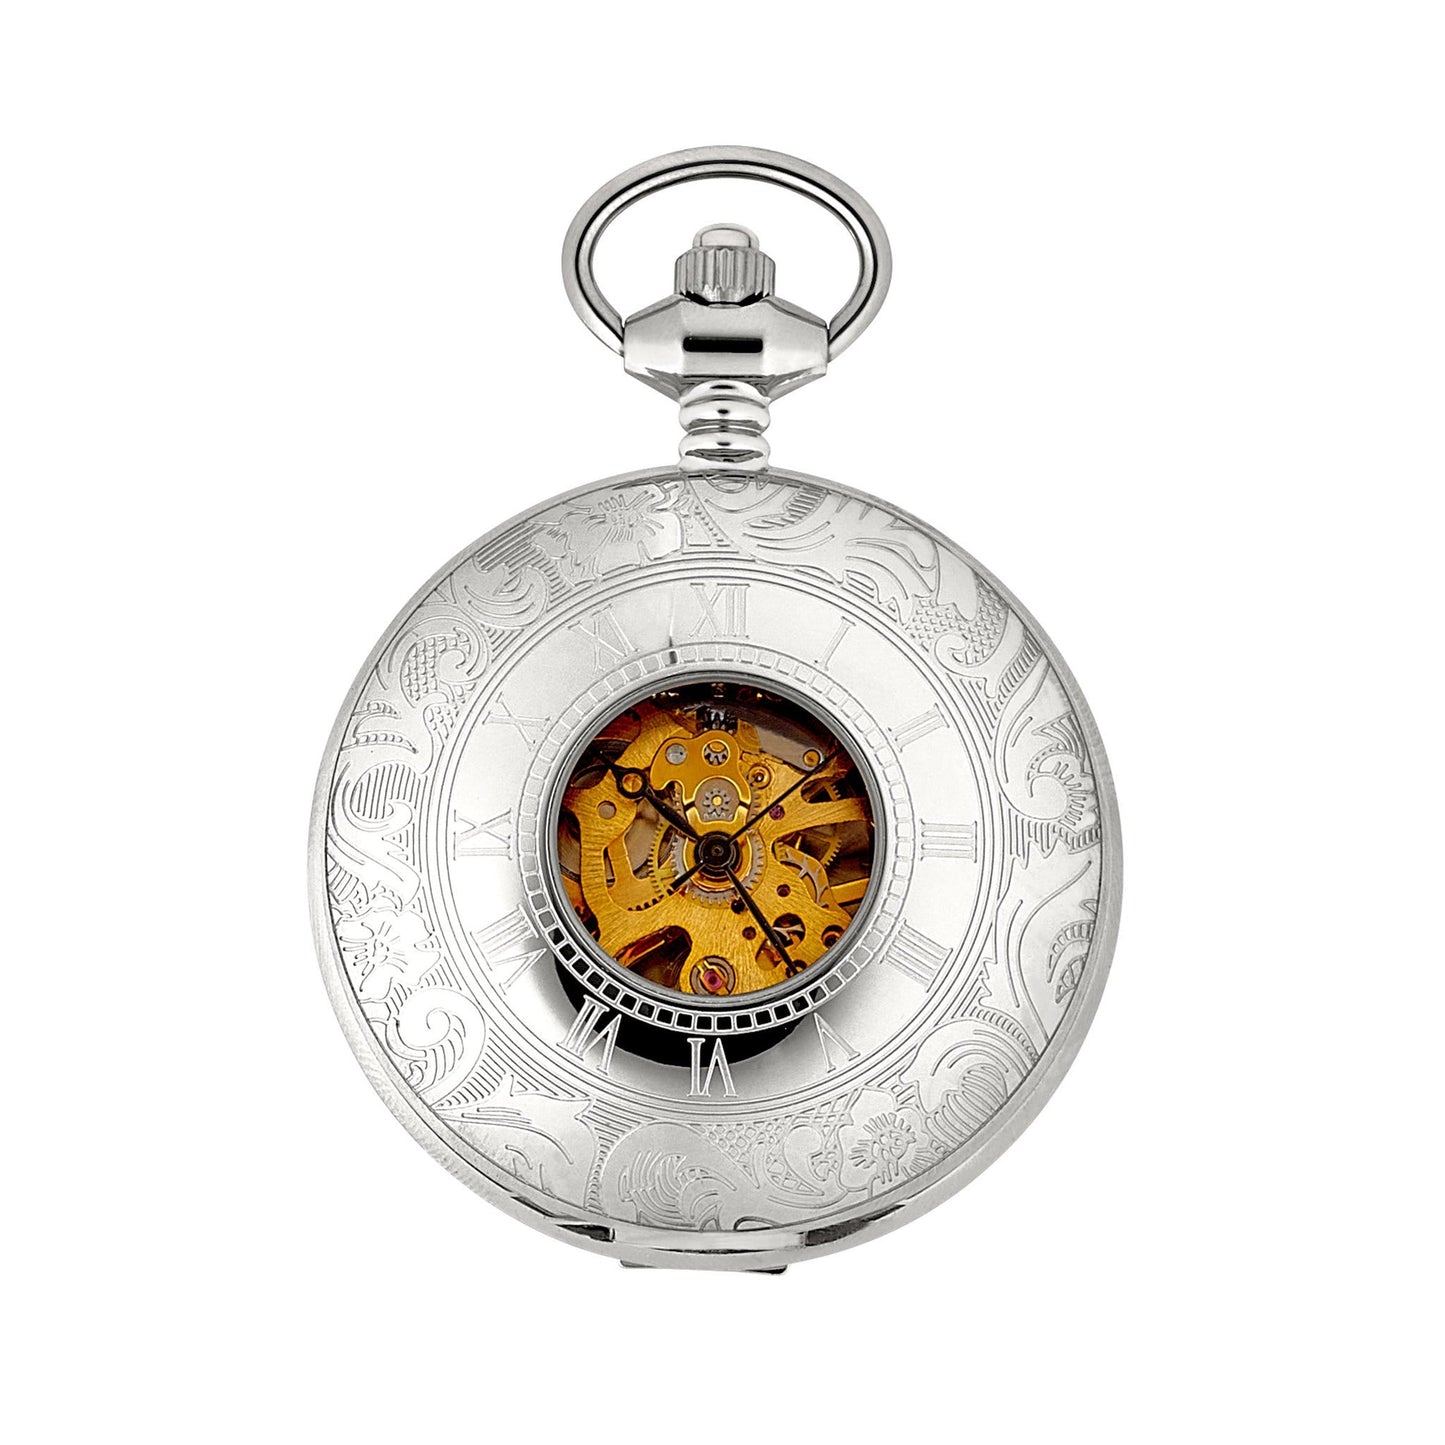 A stainless steel pocket watch with gold mechanics displayed on a neutral white background.